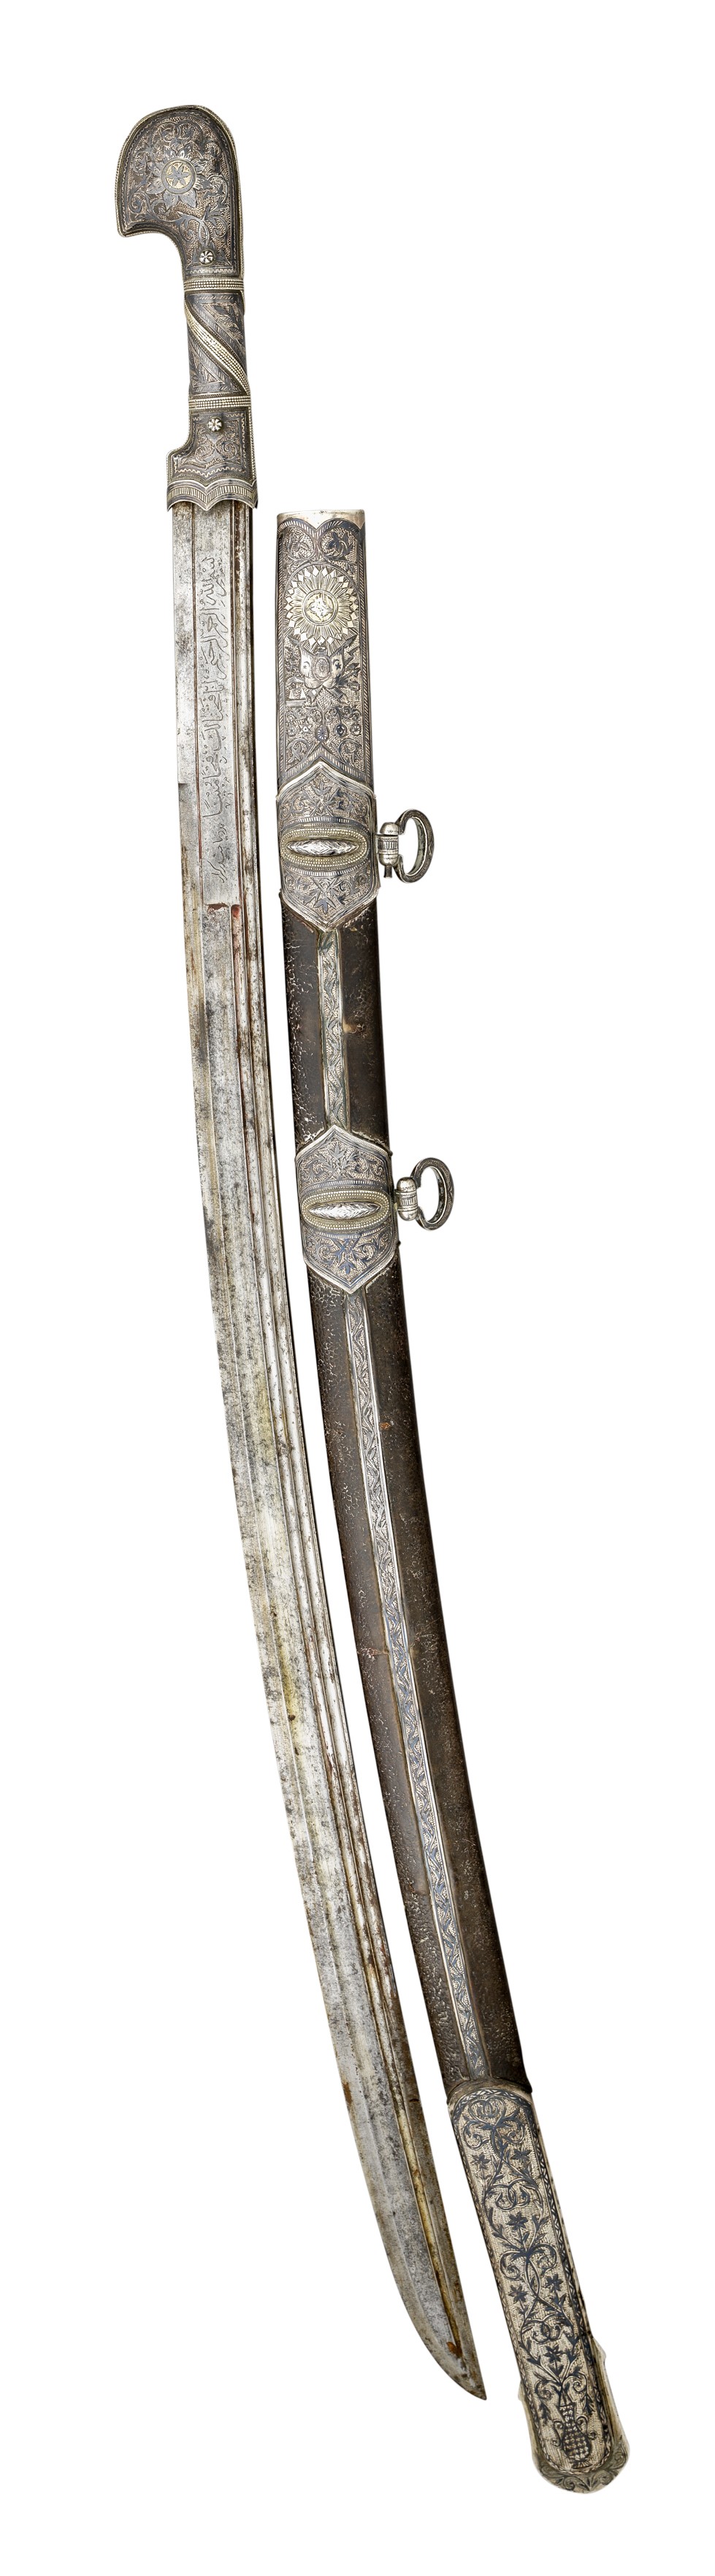 A CAUCASIAN SWORD (SHASHQA), DATED 1315 AH (CIRCA 1897/8) with curved blade double-edged towards the